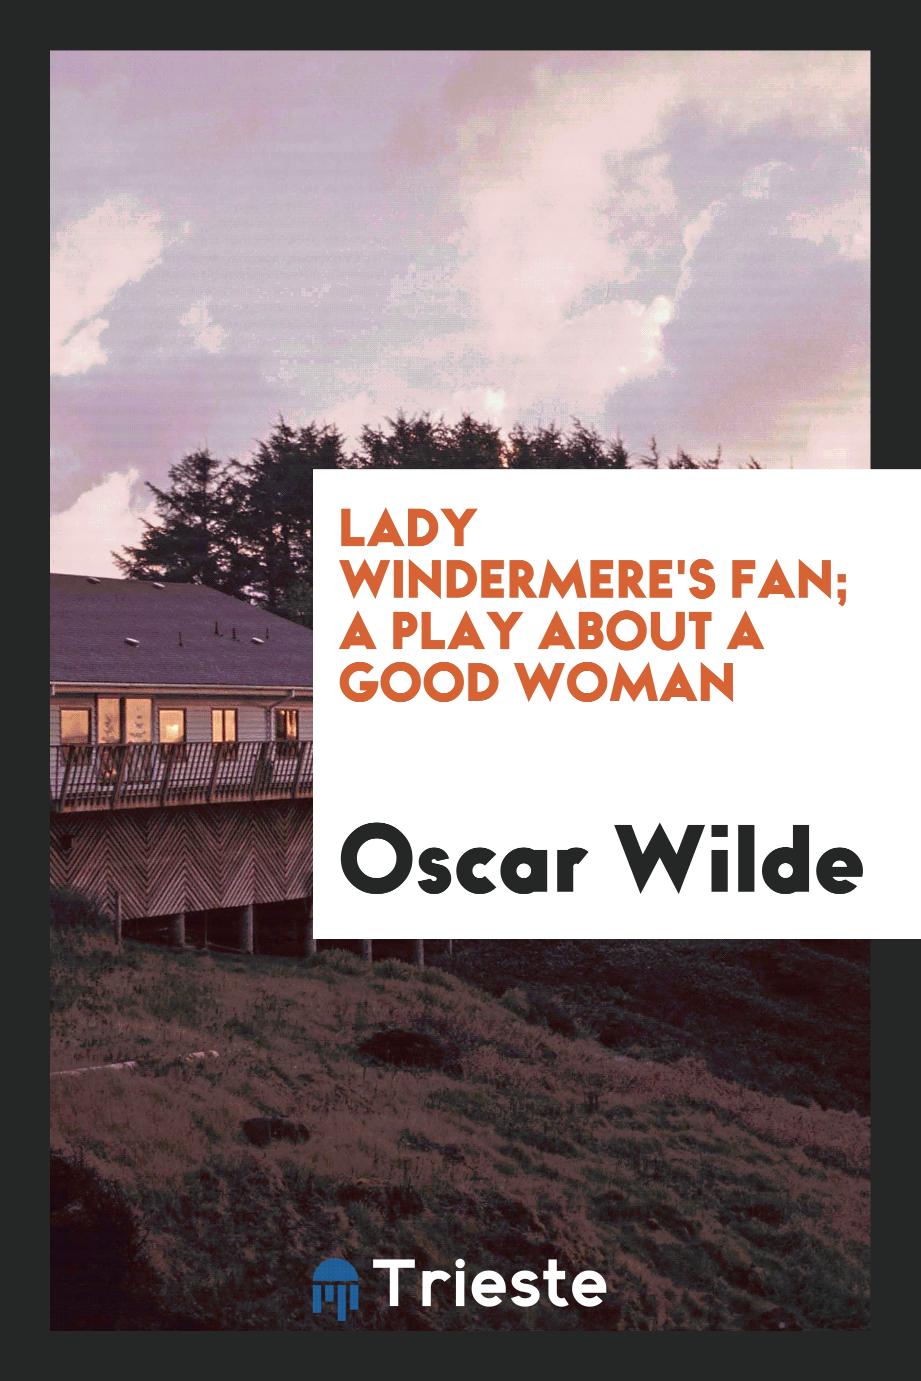 Lady windermere's fan; a play about a good woman